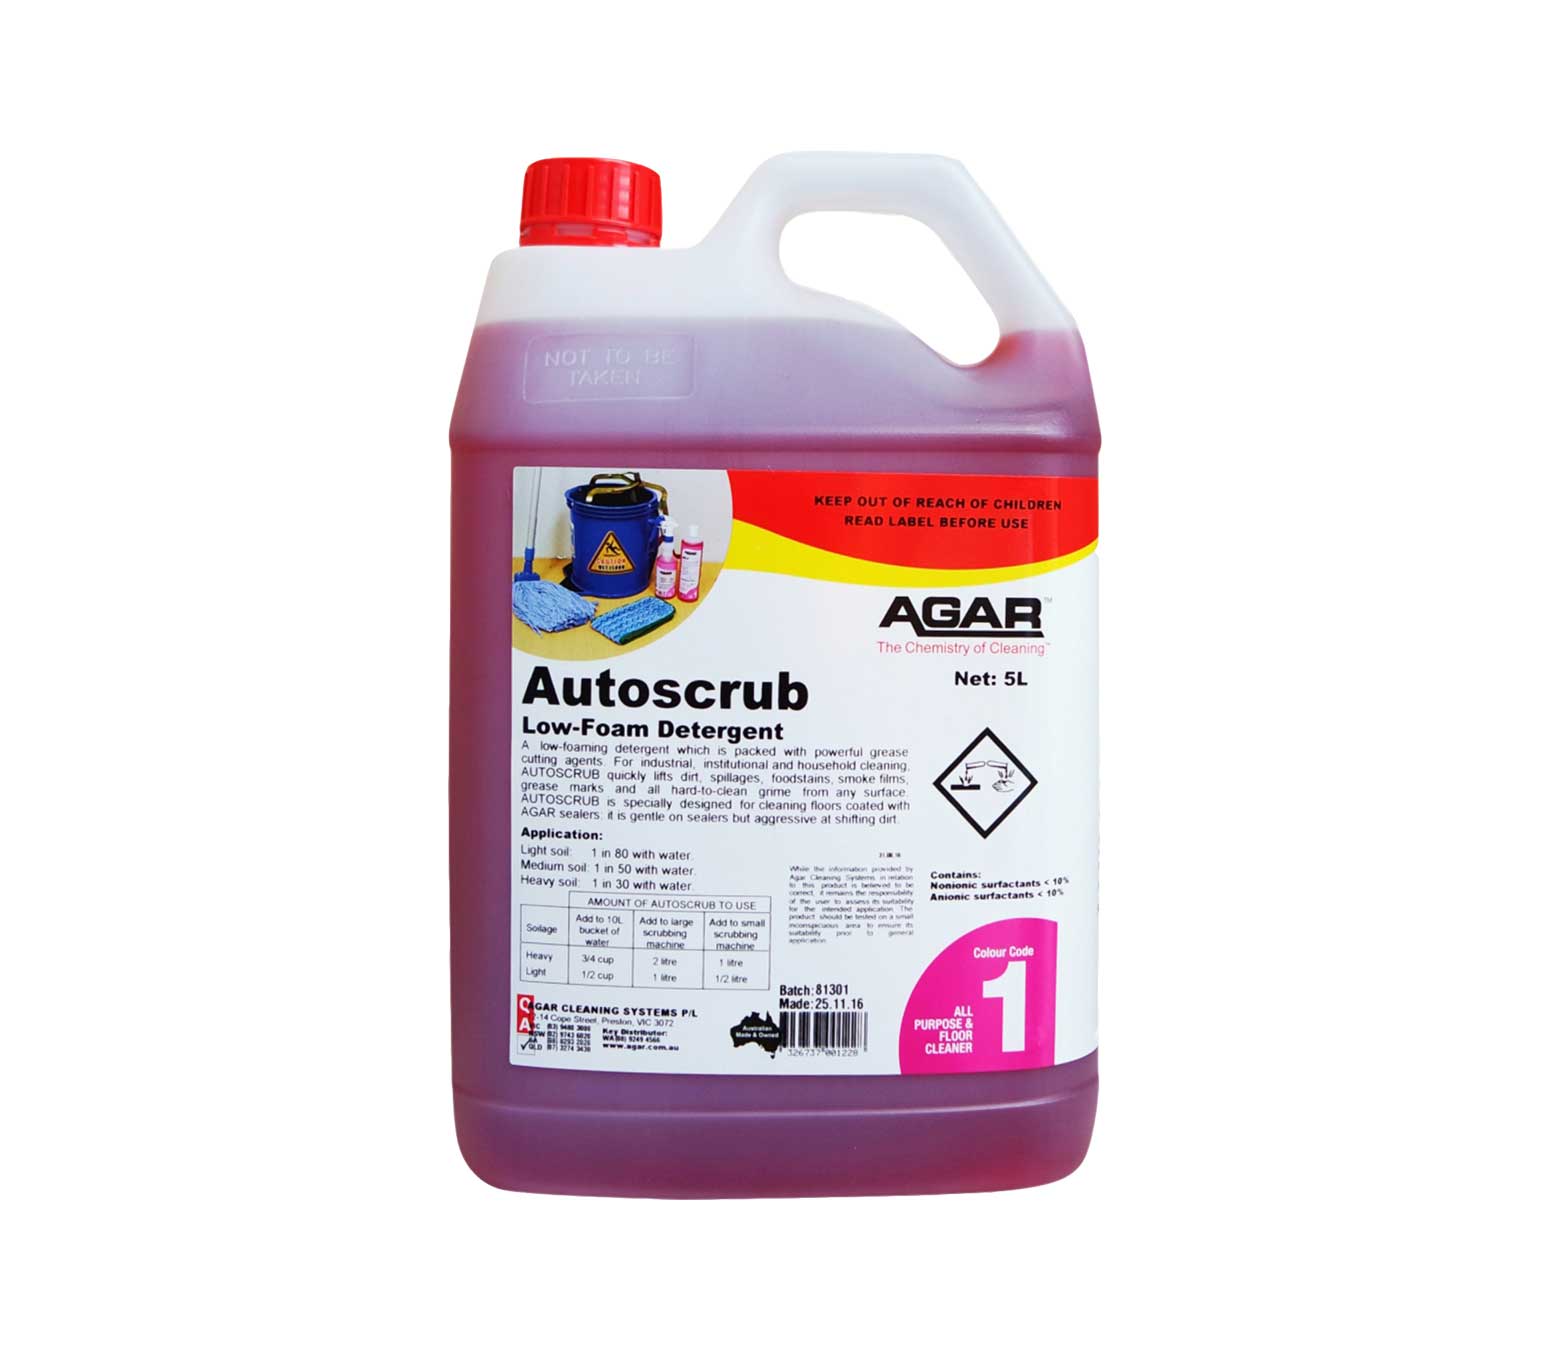 AUTOSCRUB is a low-foaming detergent